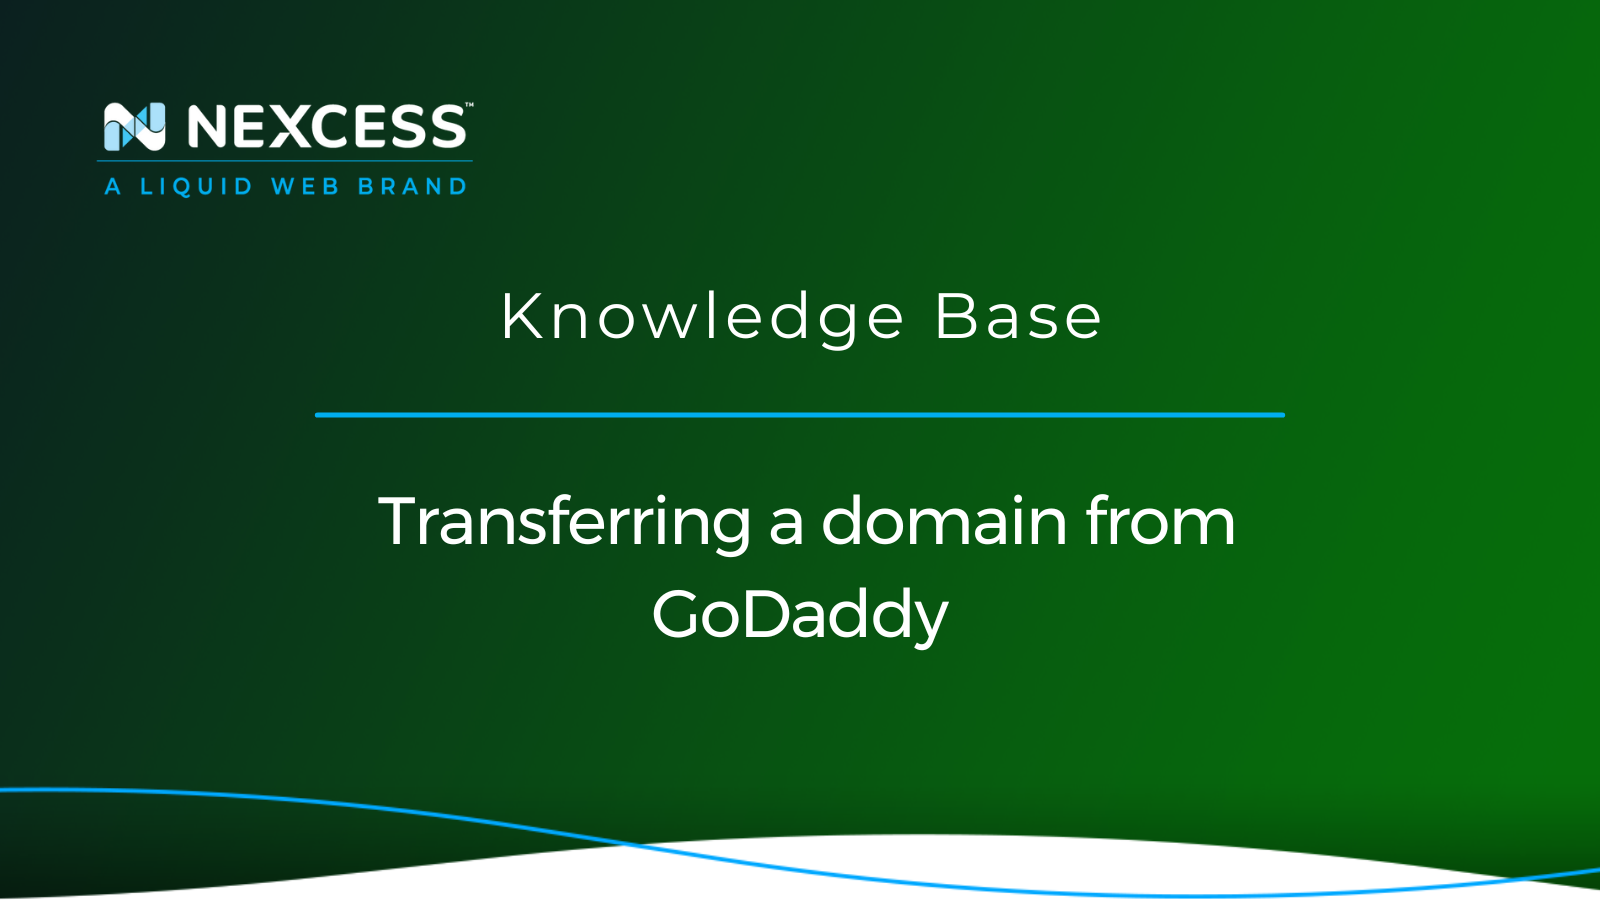 WHOIS Domain Lookup - Find out who owns a website - GoDaddy